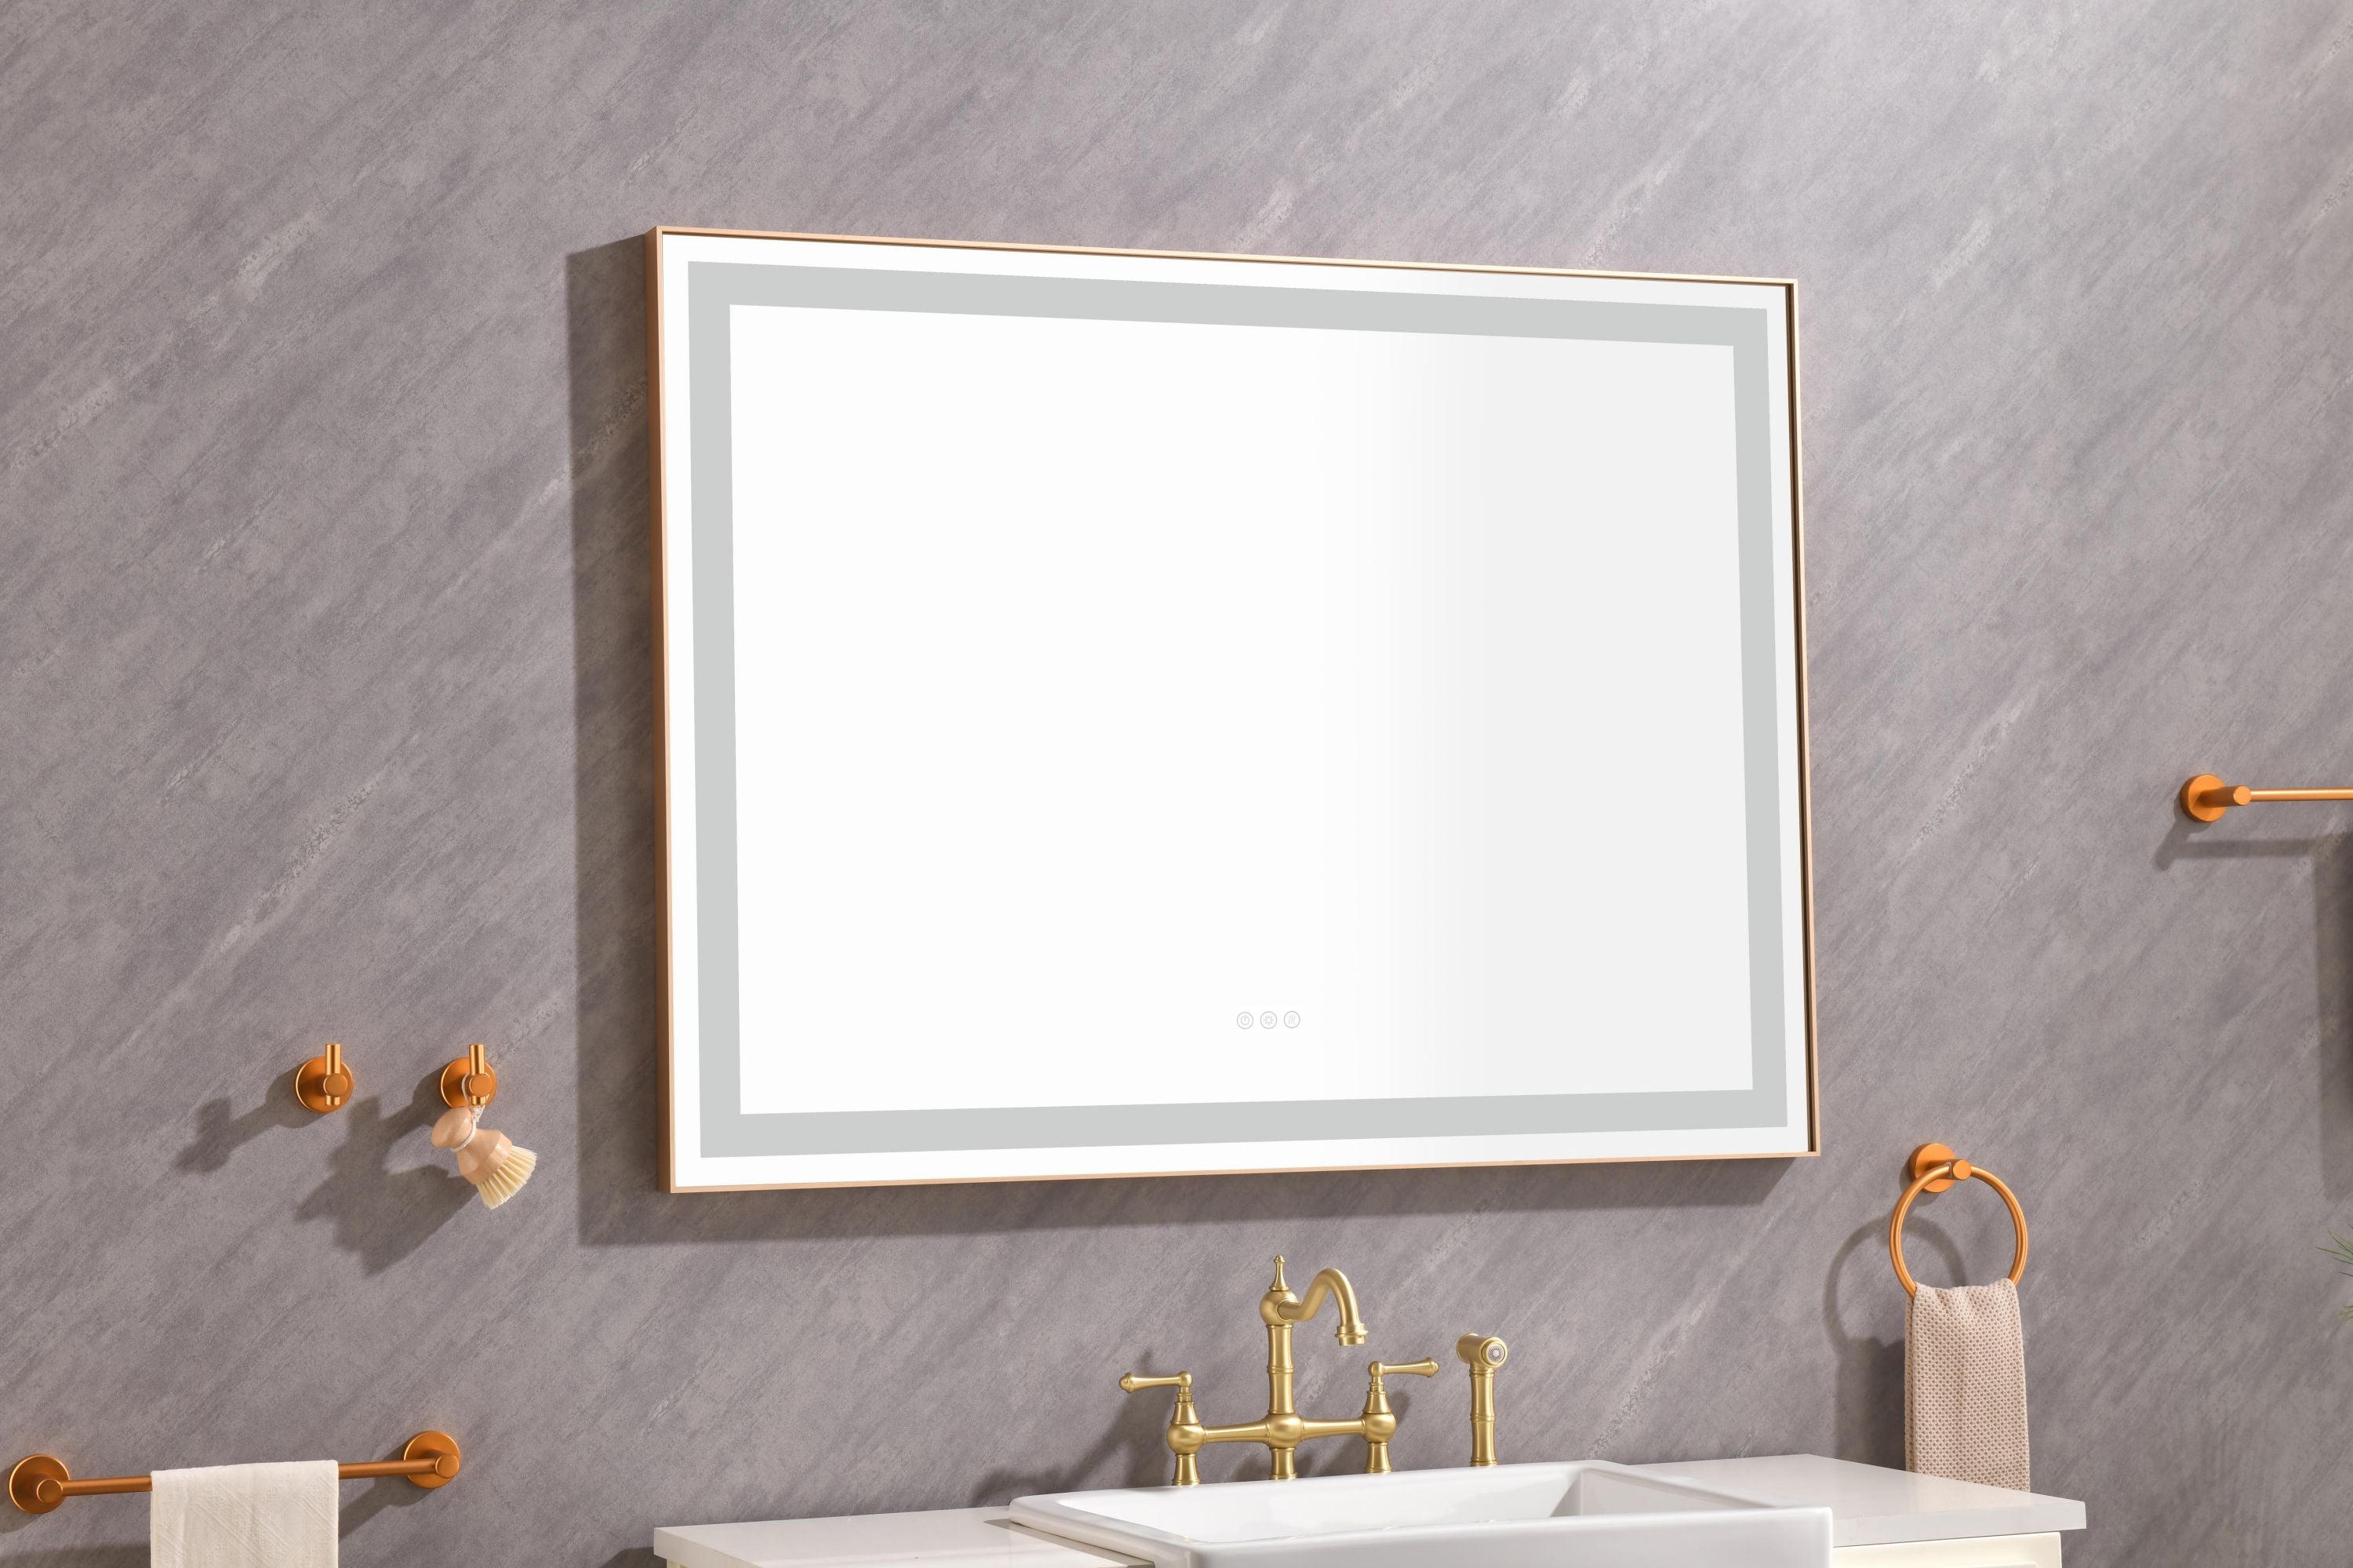 48 in. W x 36 in. H Framed LED Lighted Bathroom Wall Mounted Mirror with High Lumen+Anti-Fog Separately Control